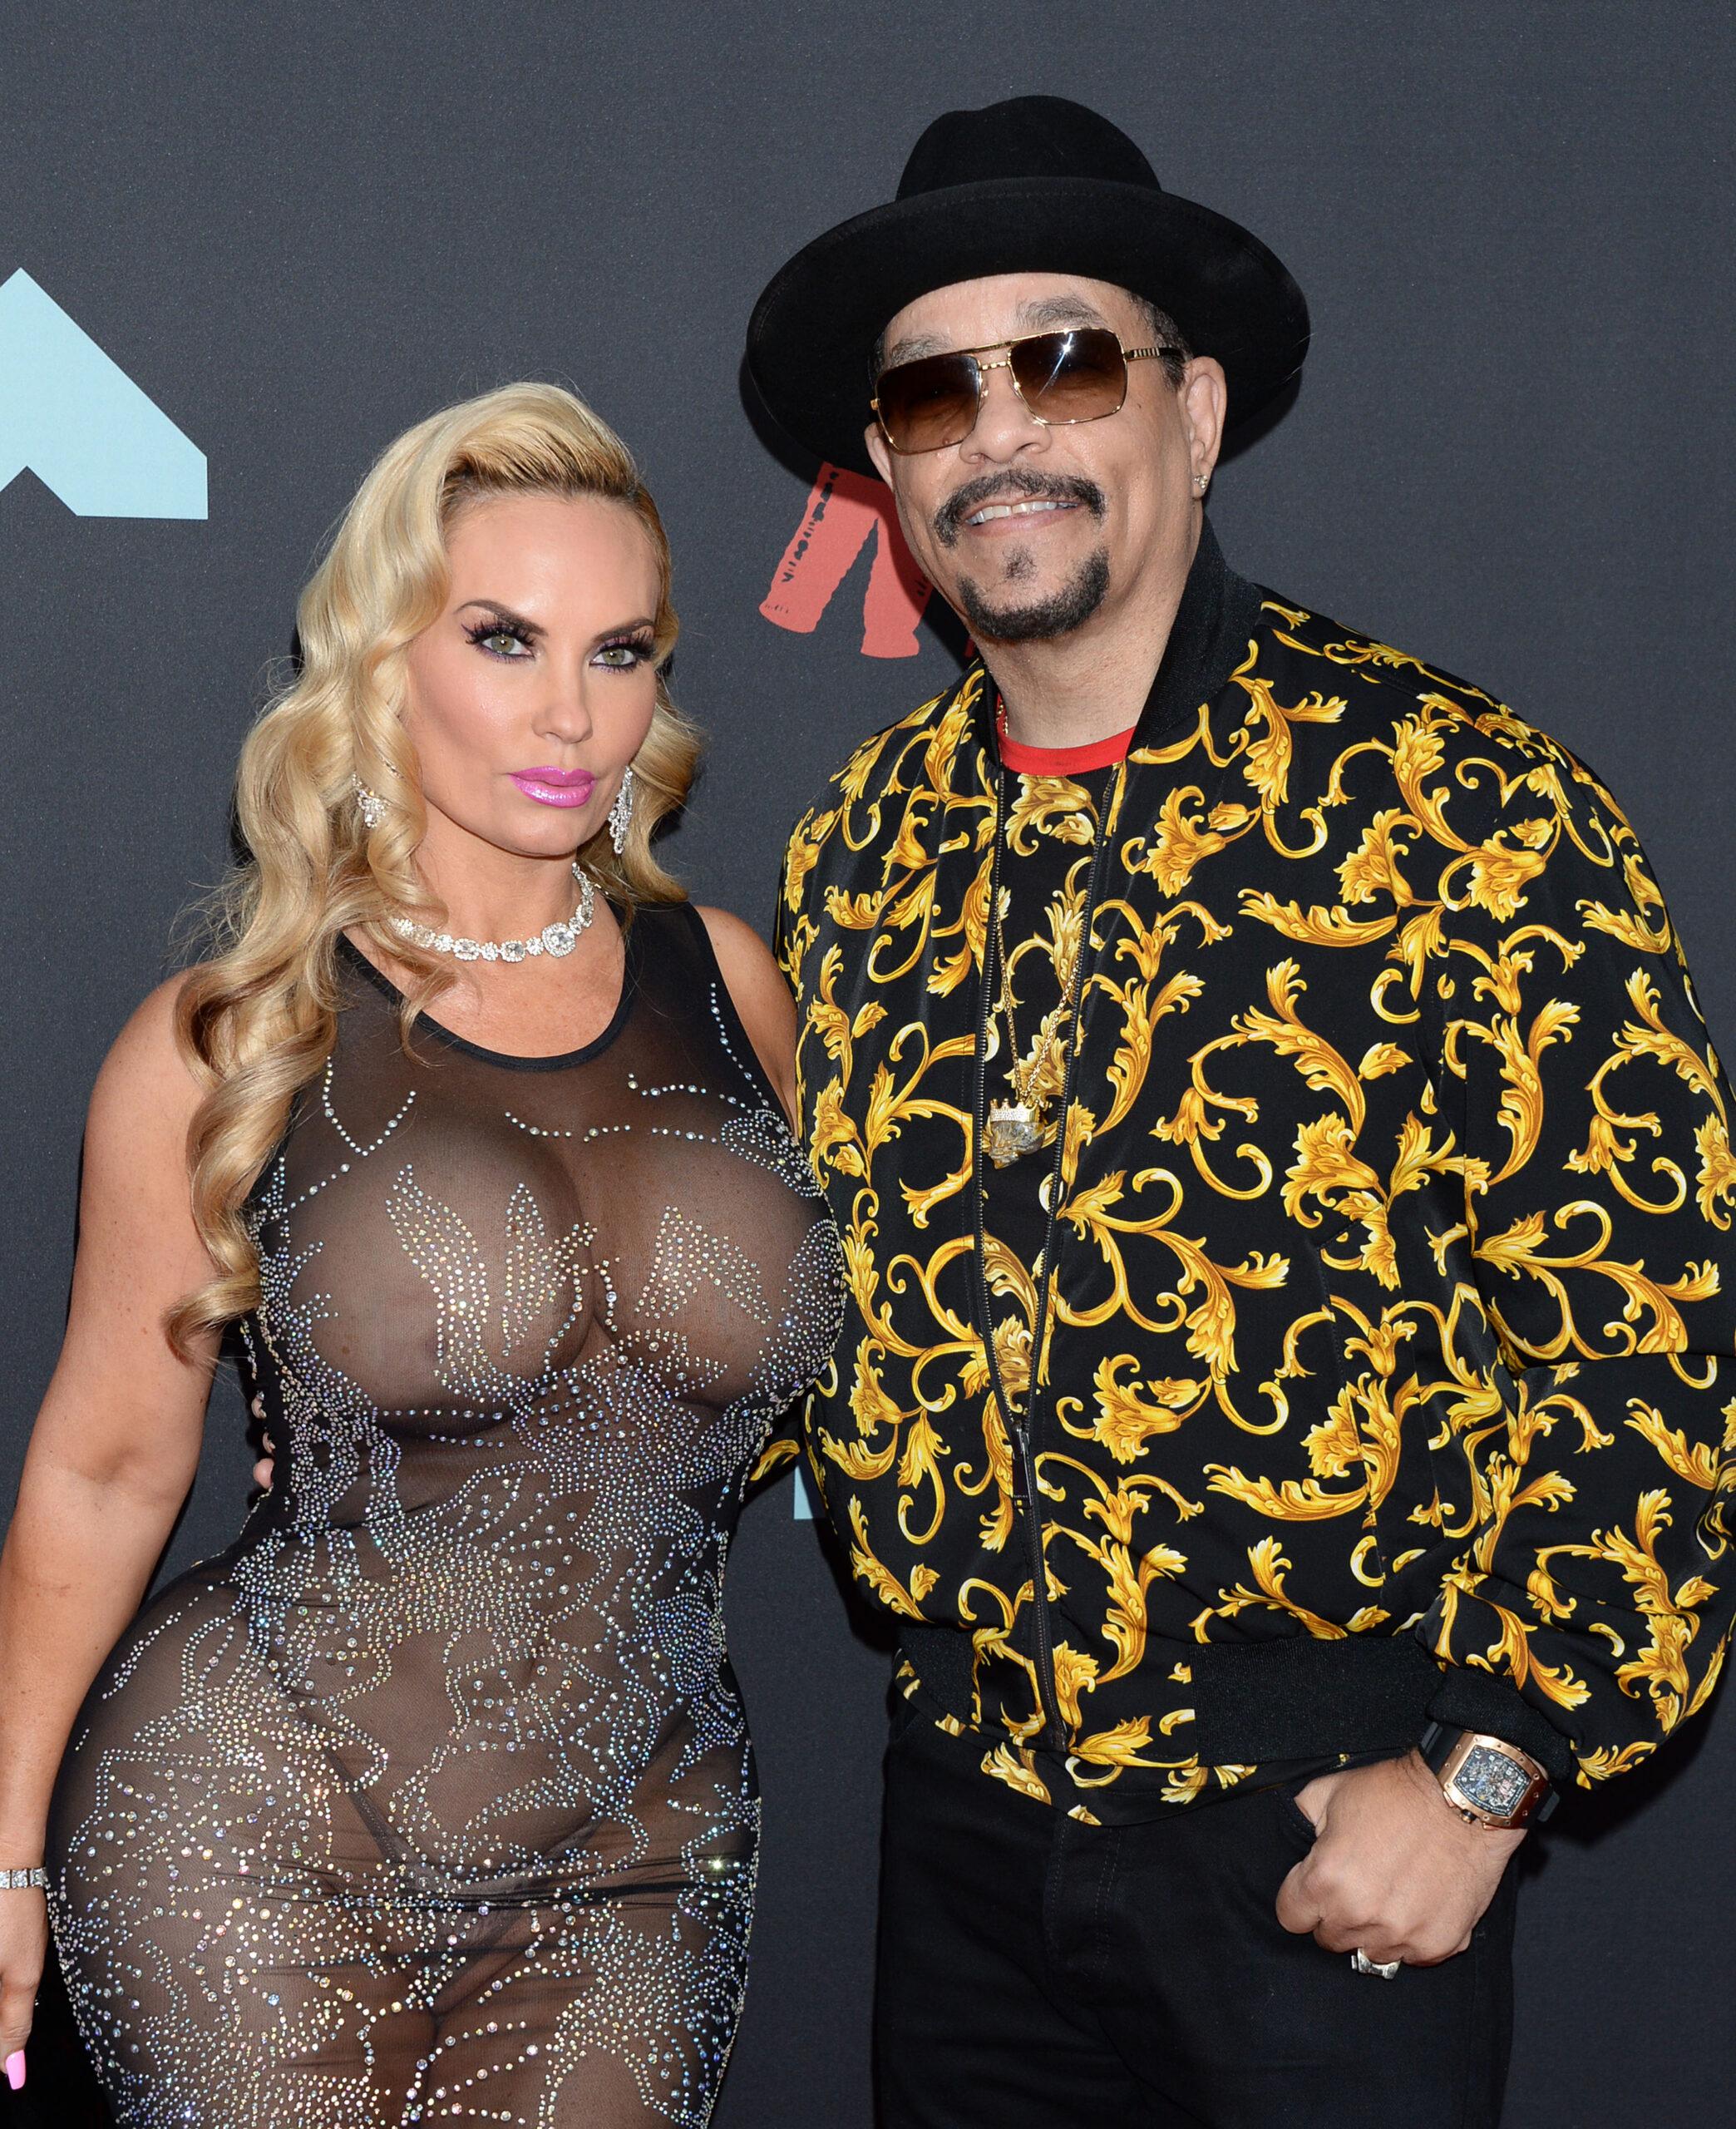 Coco Austin & Ice-T at the 2019 MTV Music Awards